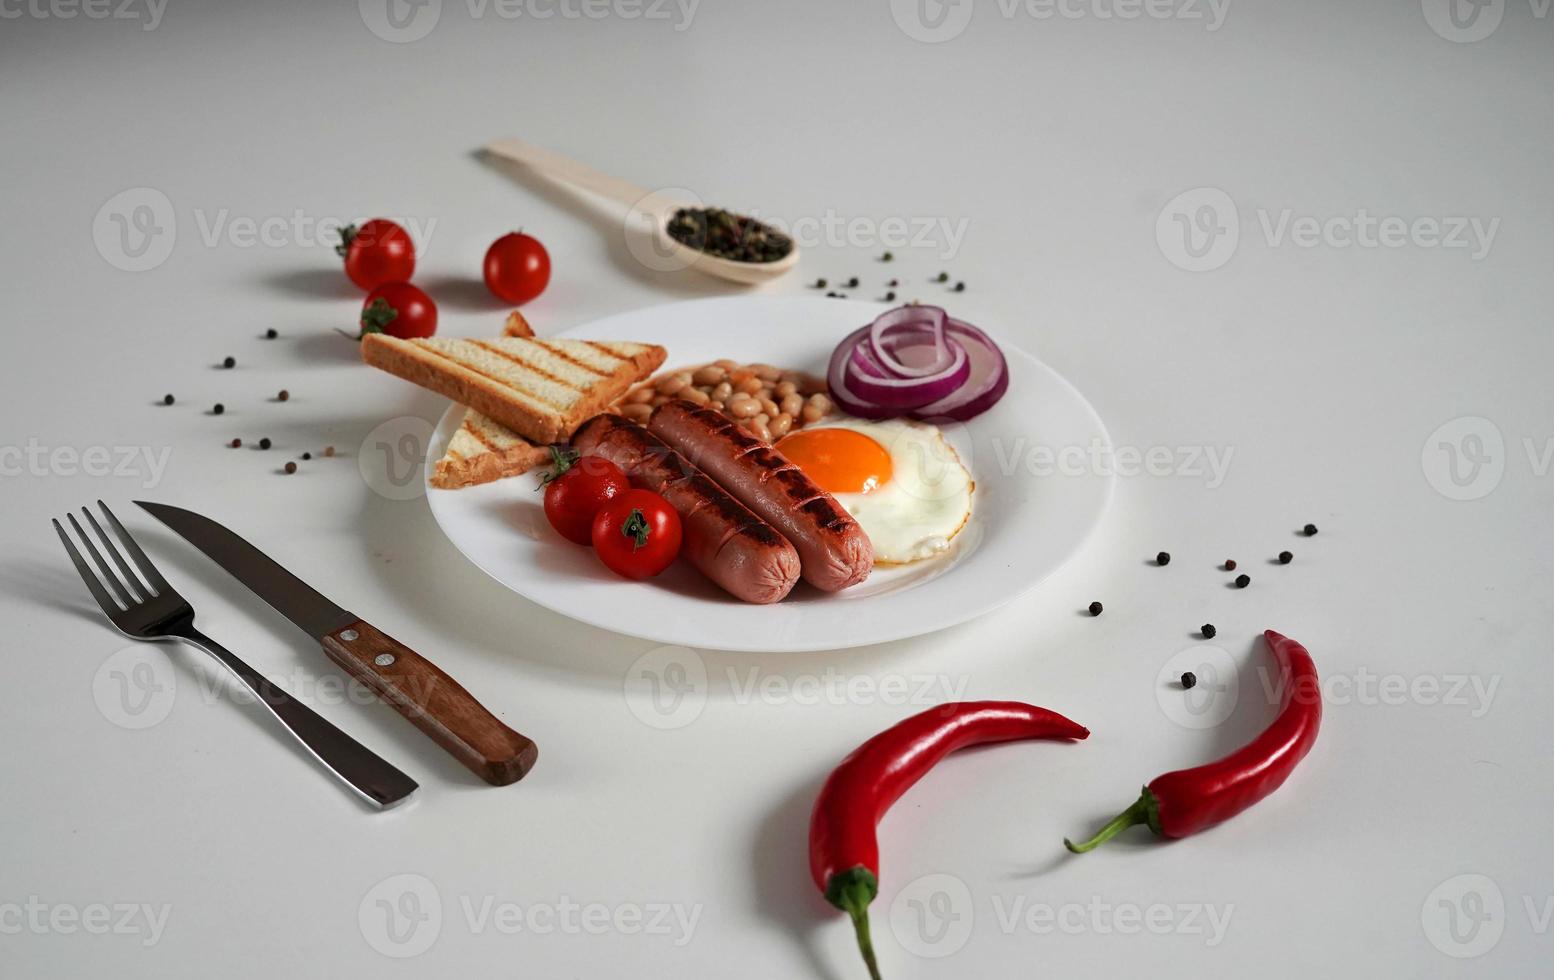 Traditional English Breakfast. Plate with Fried egg, two fried sausages, grilled bread toast, canned beans, blue onions and cherry tomatoes on a White Background. Copy space photo